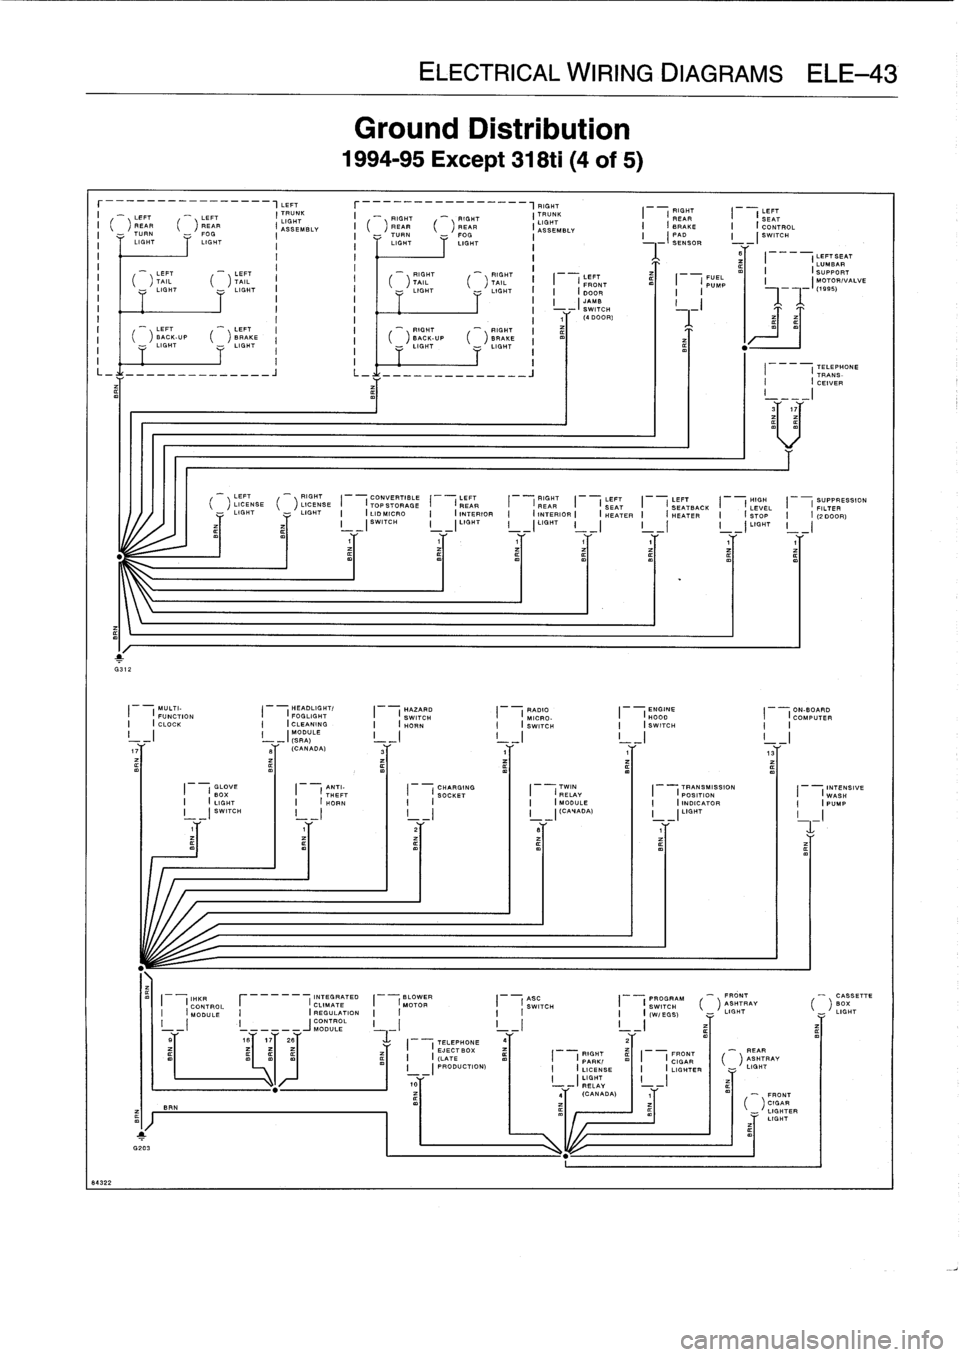 BMW 323i 1998 E36 Owners Guide 
ELECTRICAL
WIRING
DIAGRAMSELE-43

r----------_-__--,LEFT

	

r---__-------~_--,FIGHT
I

	

-

	

RIGHT

	

LIT
LEFT

	

"-

	

LEFT

	

I
IGHT
K

	

I

	

_

	

RIGHT

	



	

RIGHT

	

I
TRUNK
SEM